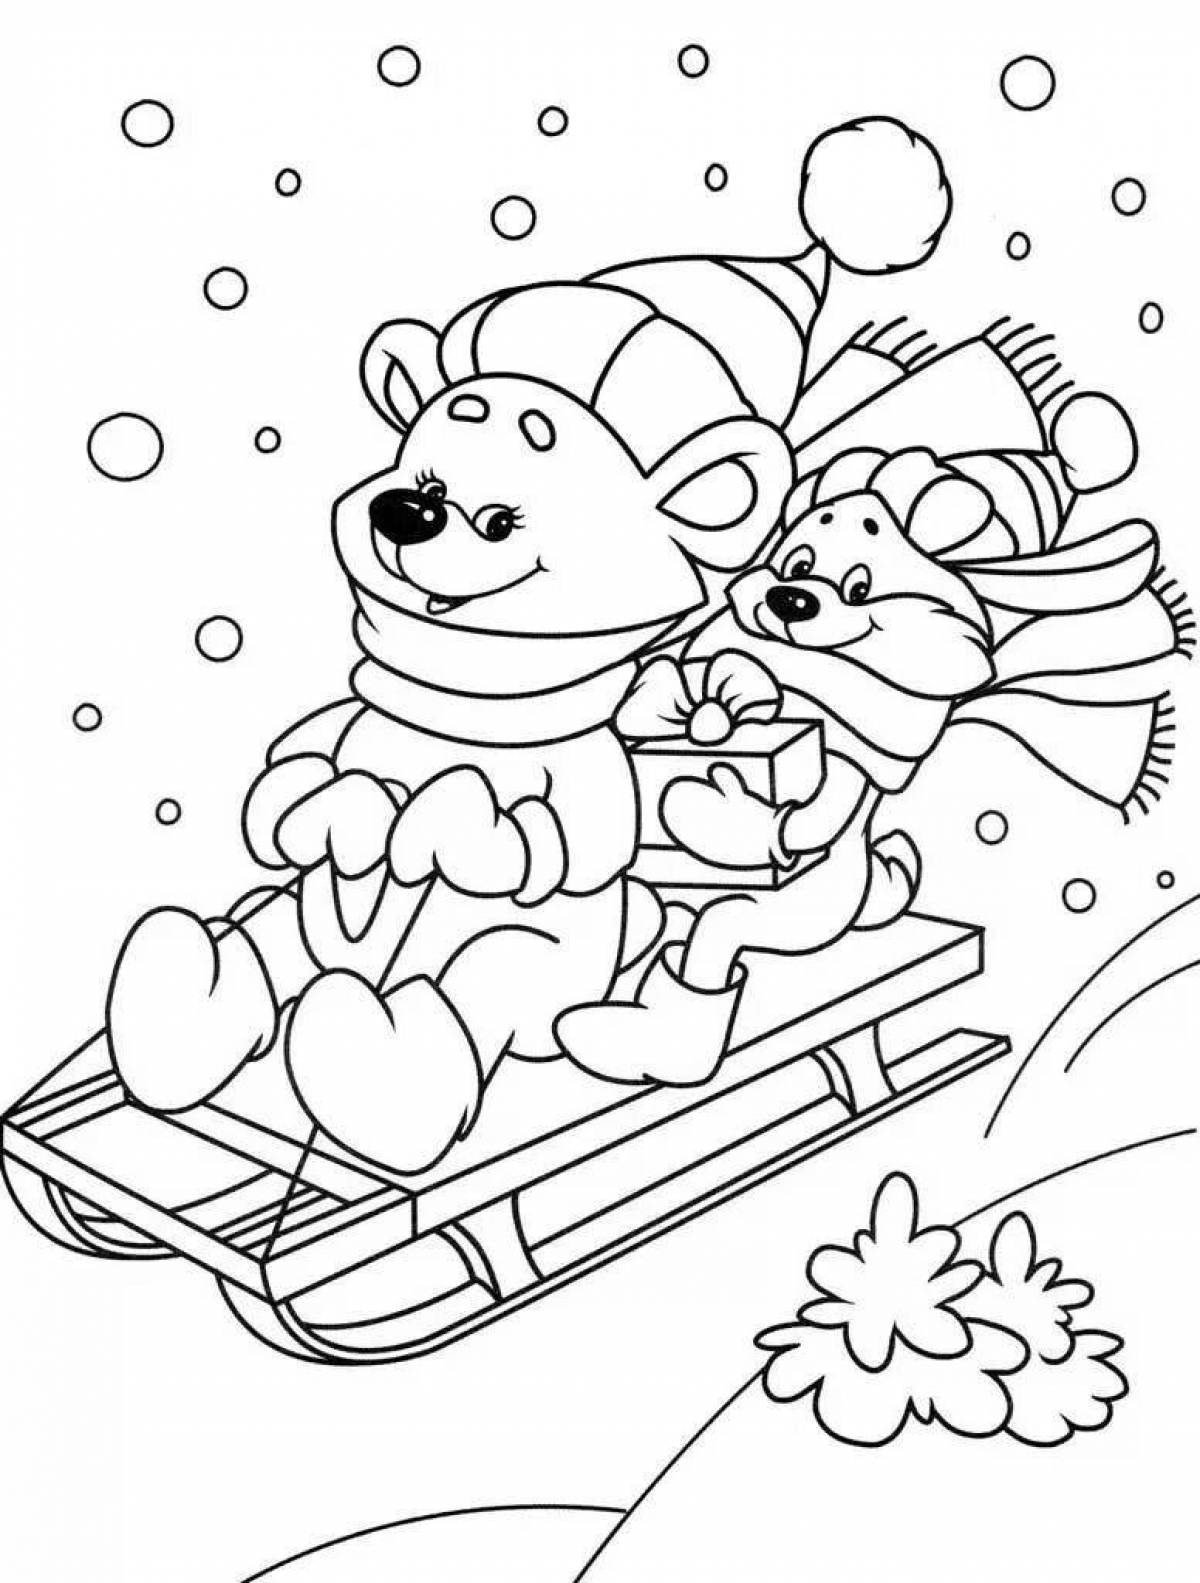 Bright winter coloring book for children 4 years old